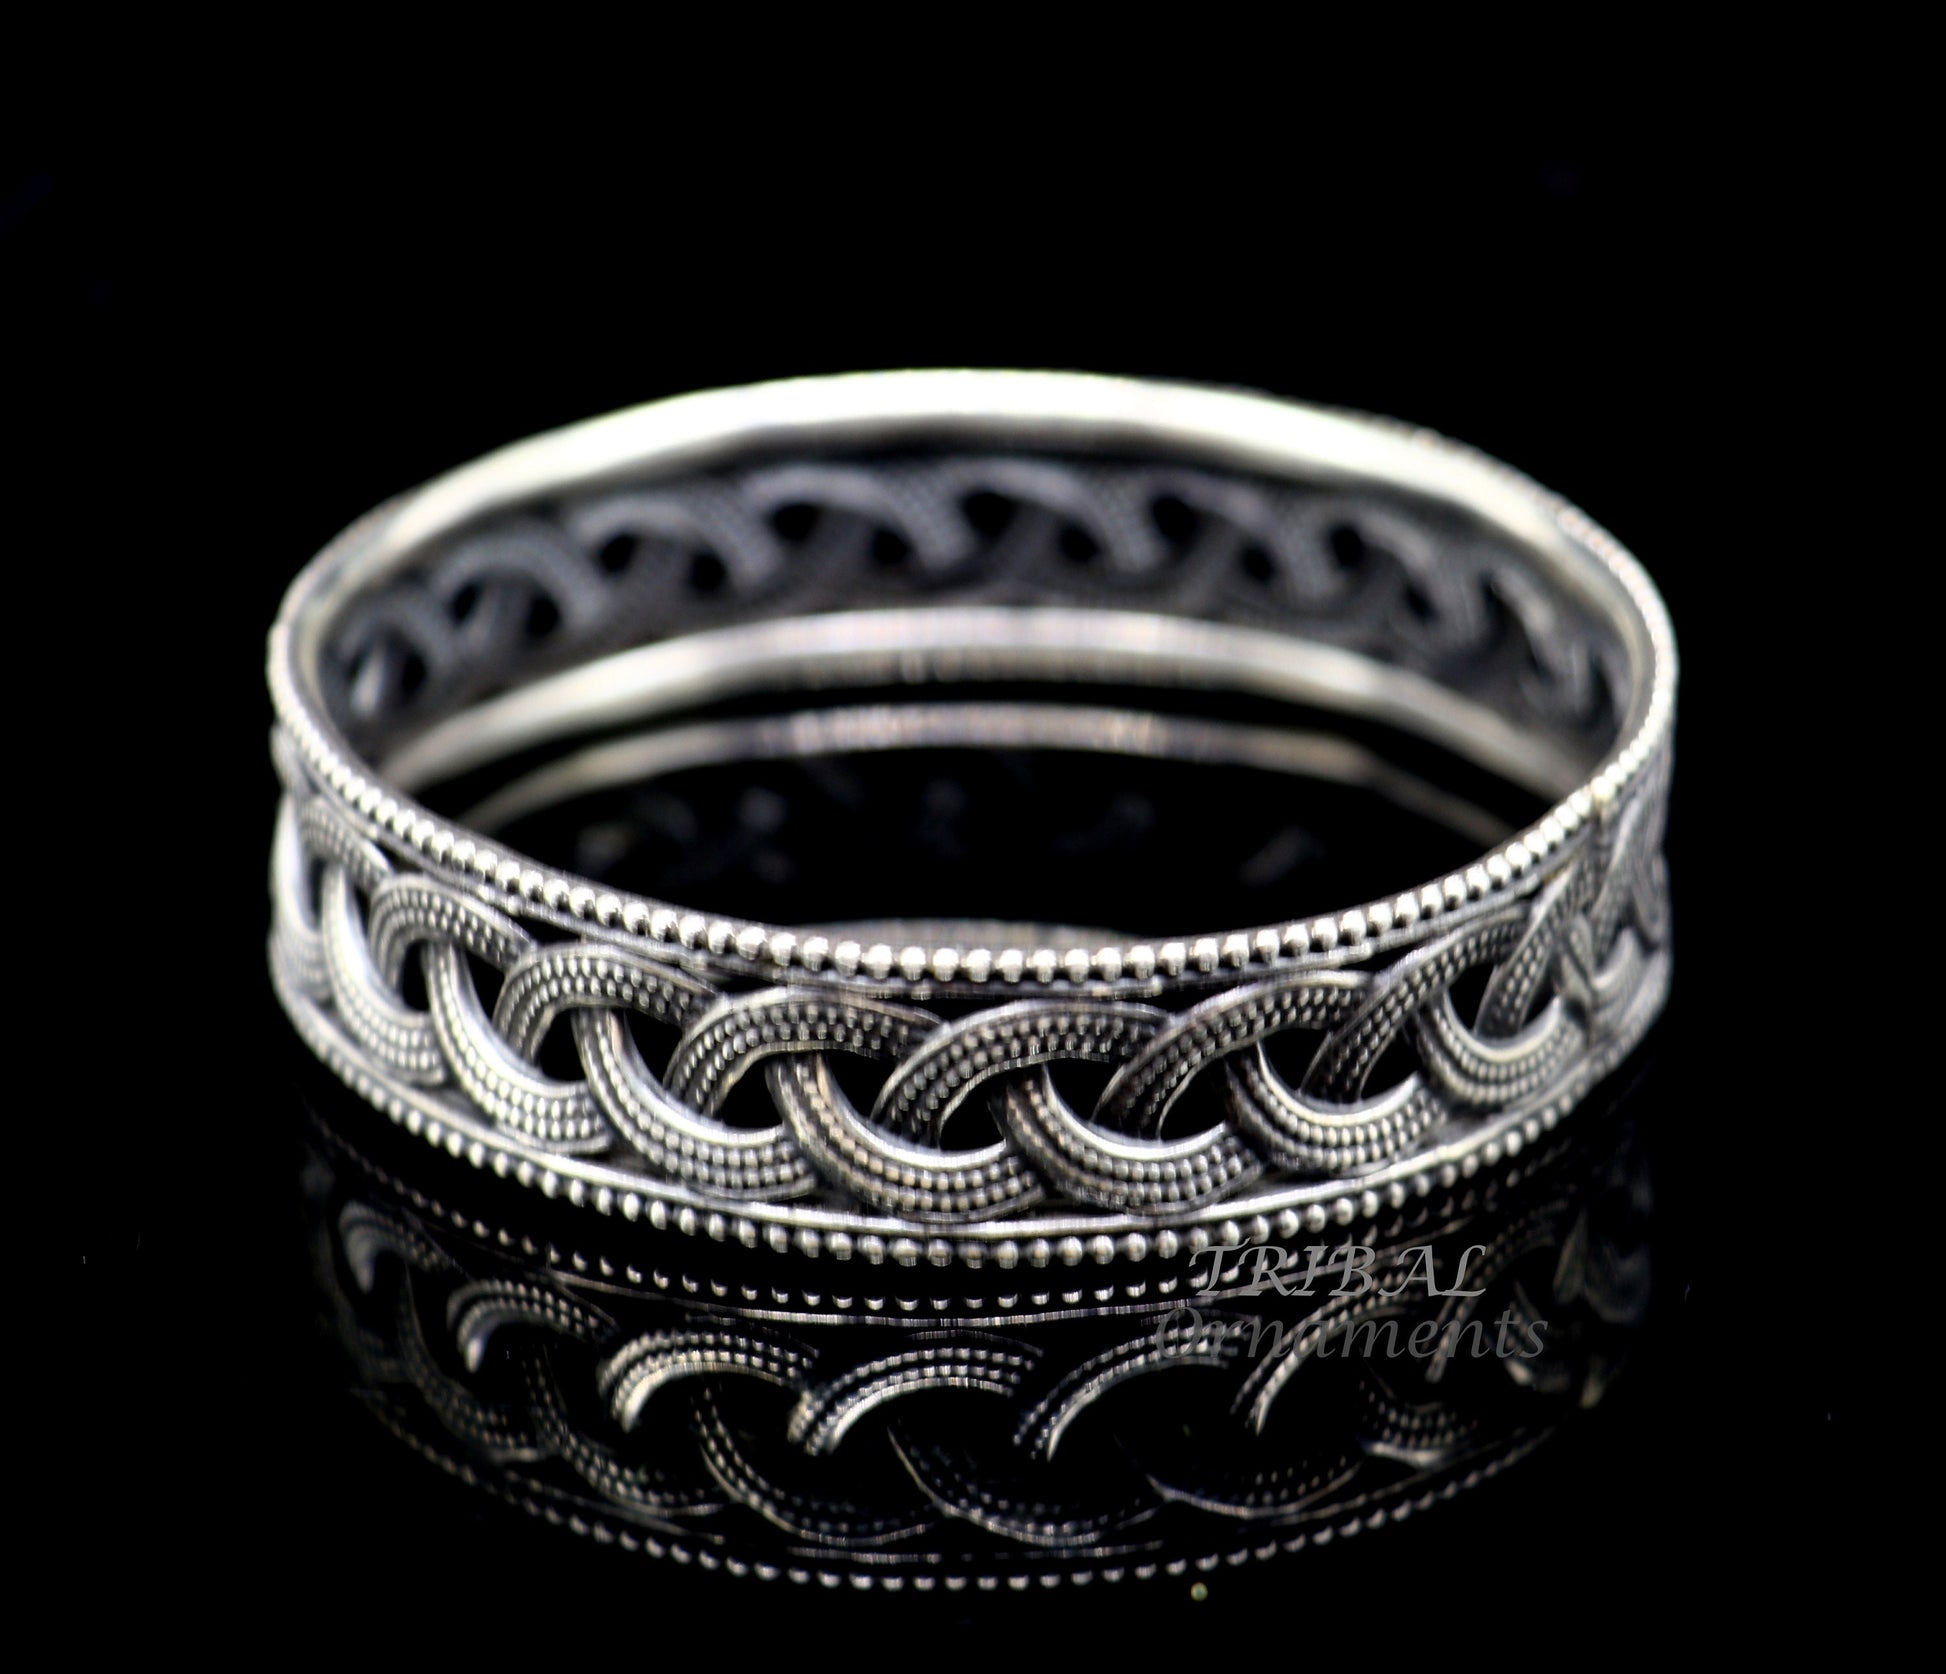 Elegant 925 sterling silver flower design unique style handmade bangle bracelet , best brides collection wedding jewelry from india nba334 - TRIBAL ORNAMENTS